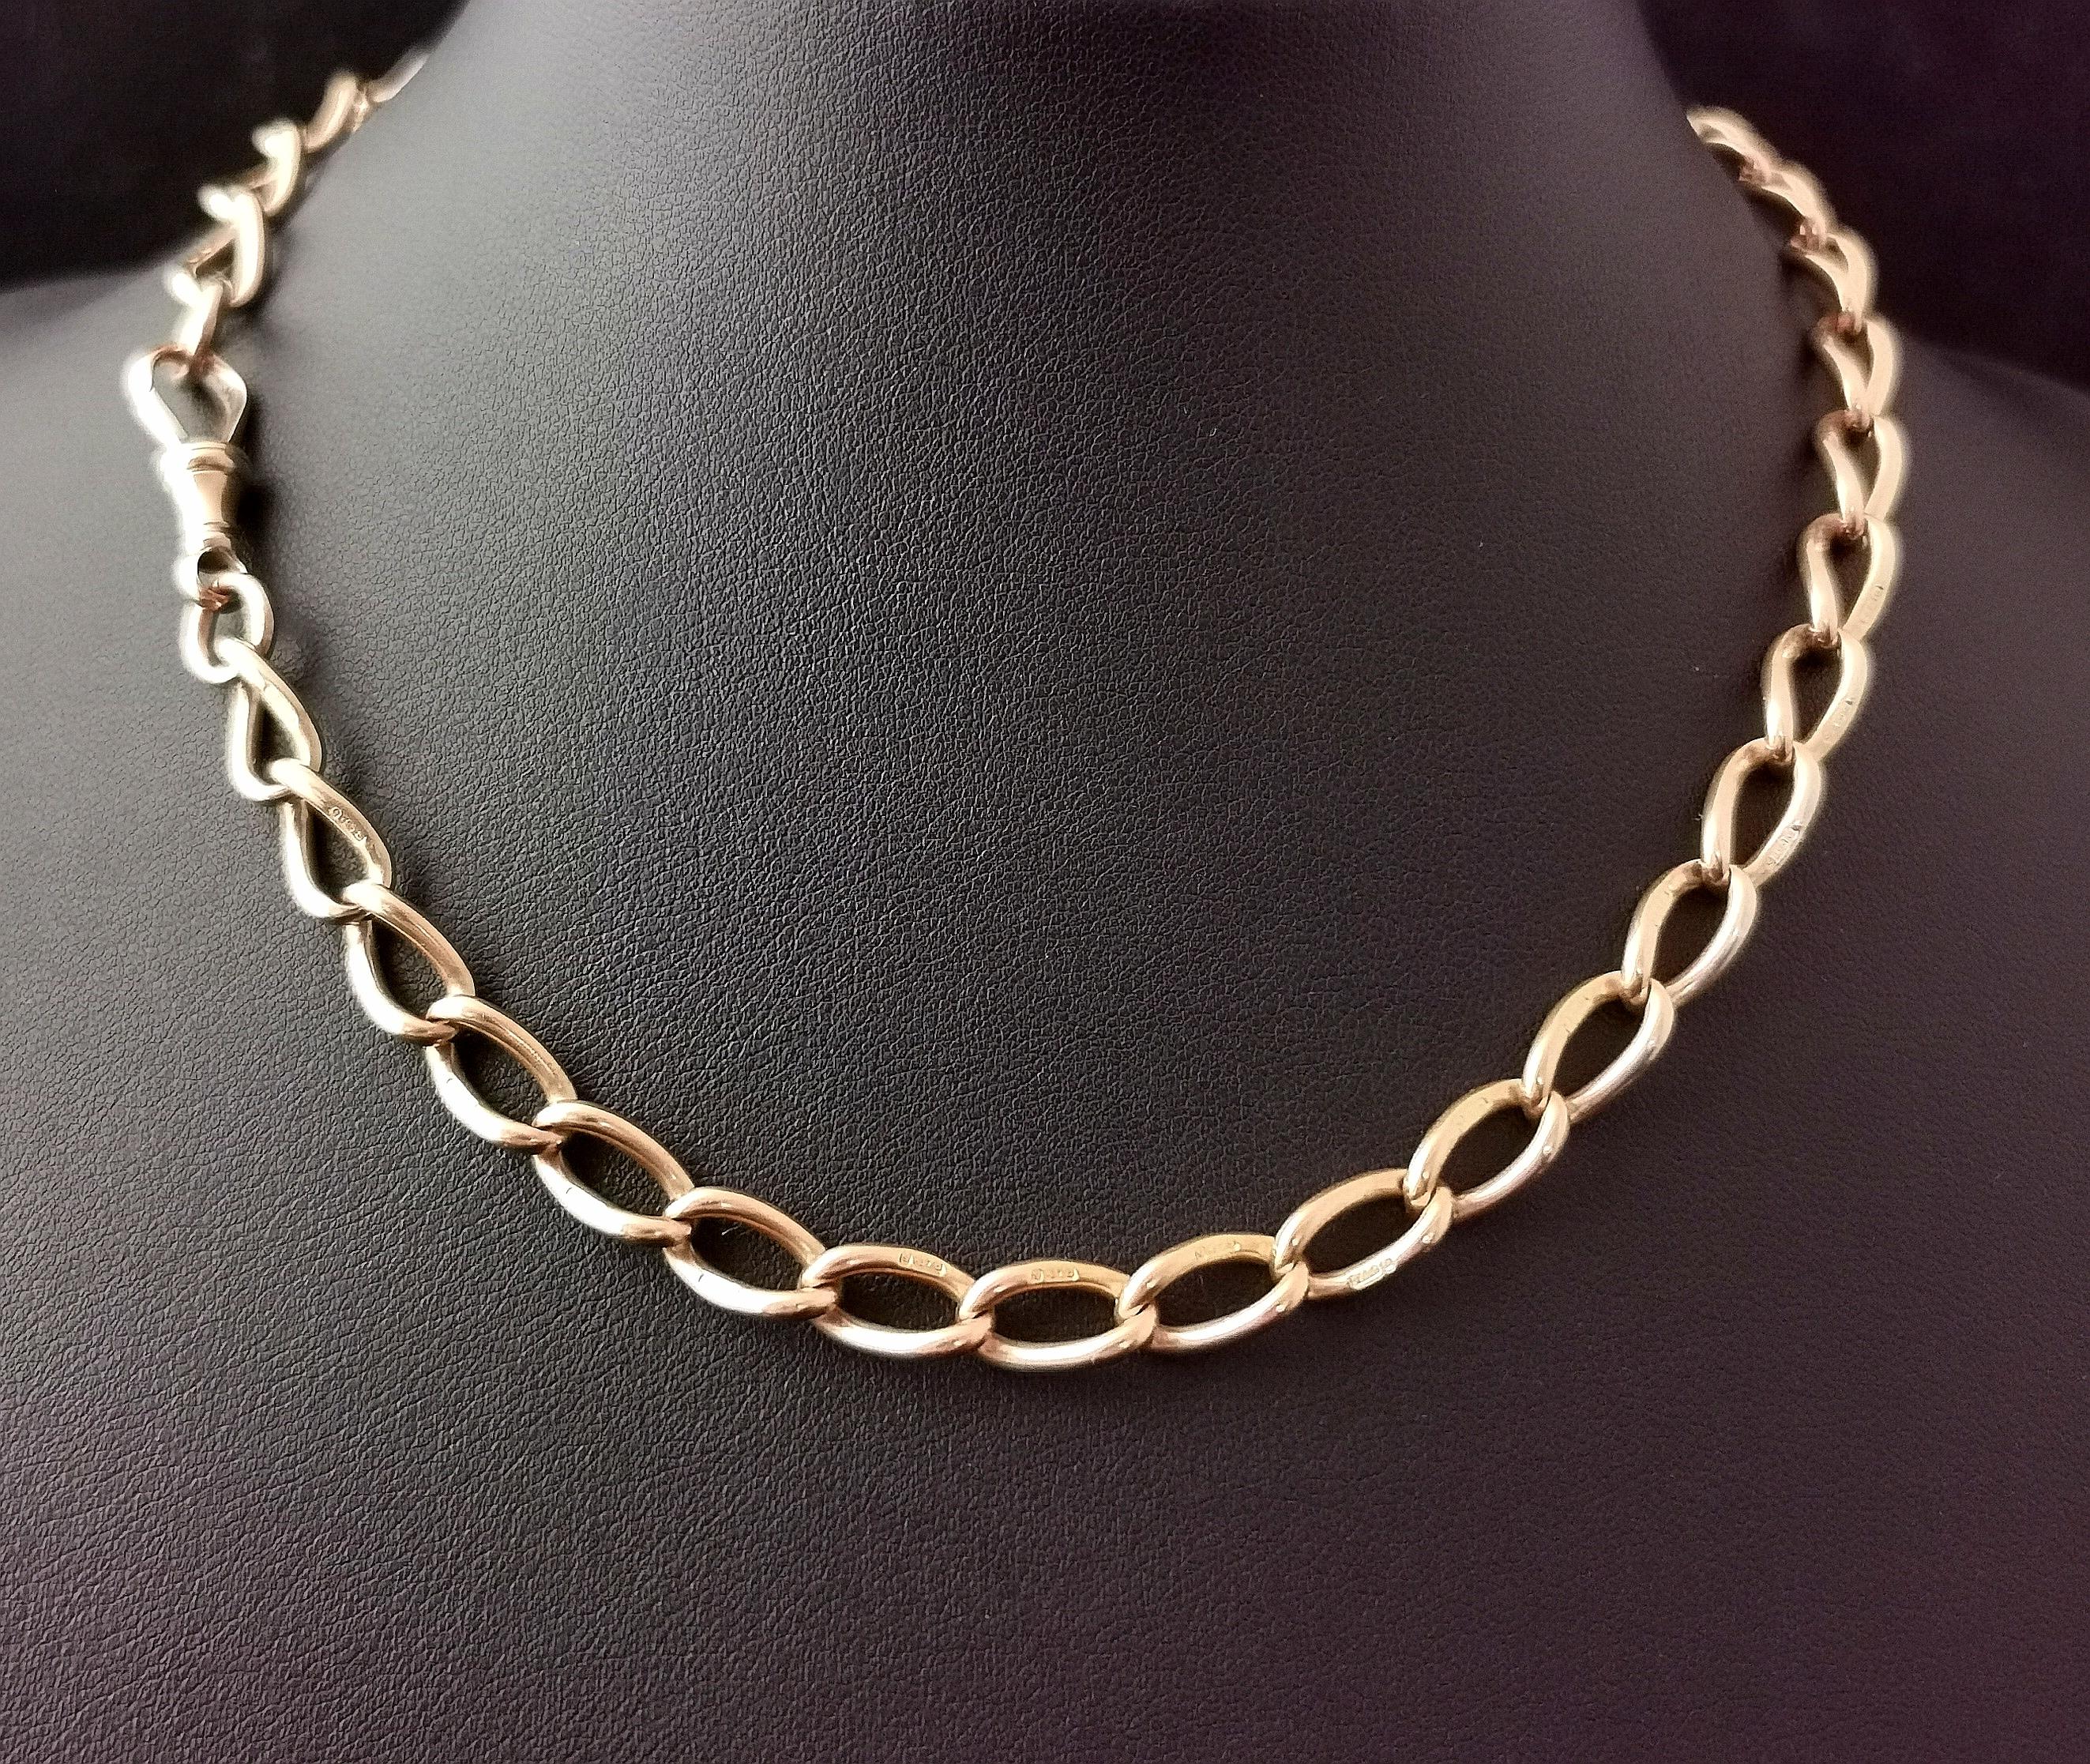 A gorgeous antique 9kt Rose gold single Albert chain or watch chain.

It has beautiful elongated curb links with a light rosey overtone, each individually stamped for 9kt gold, these stretched curb links make for a wonderful design one of our